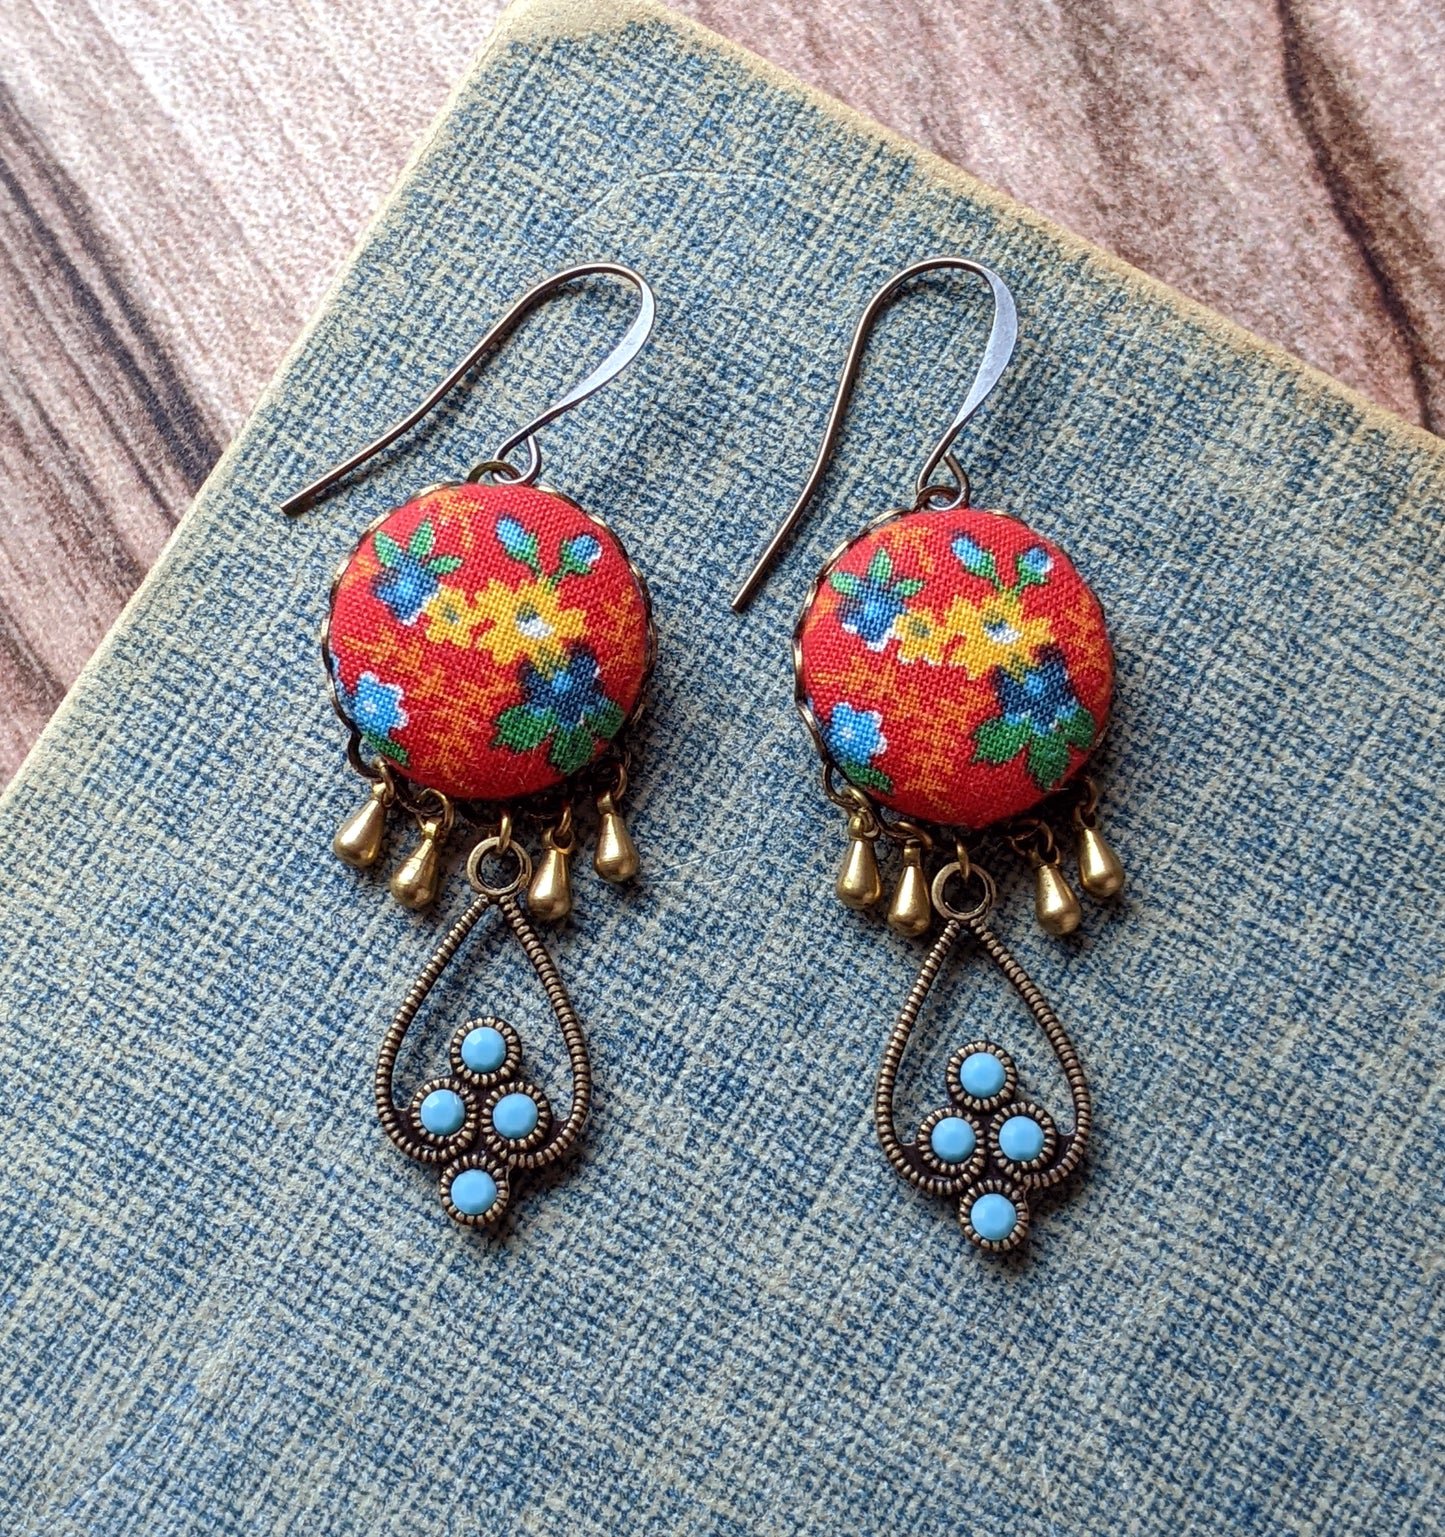 Red And Turquoise Earrings With Vintage Floral Print Fabric And Rhinestones, Boho Southwest Jewelry